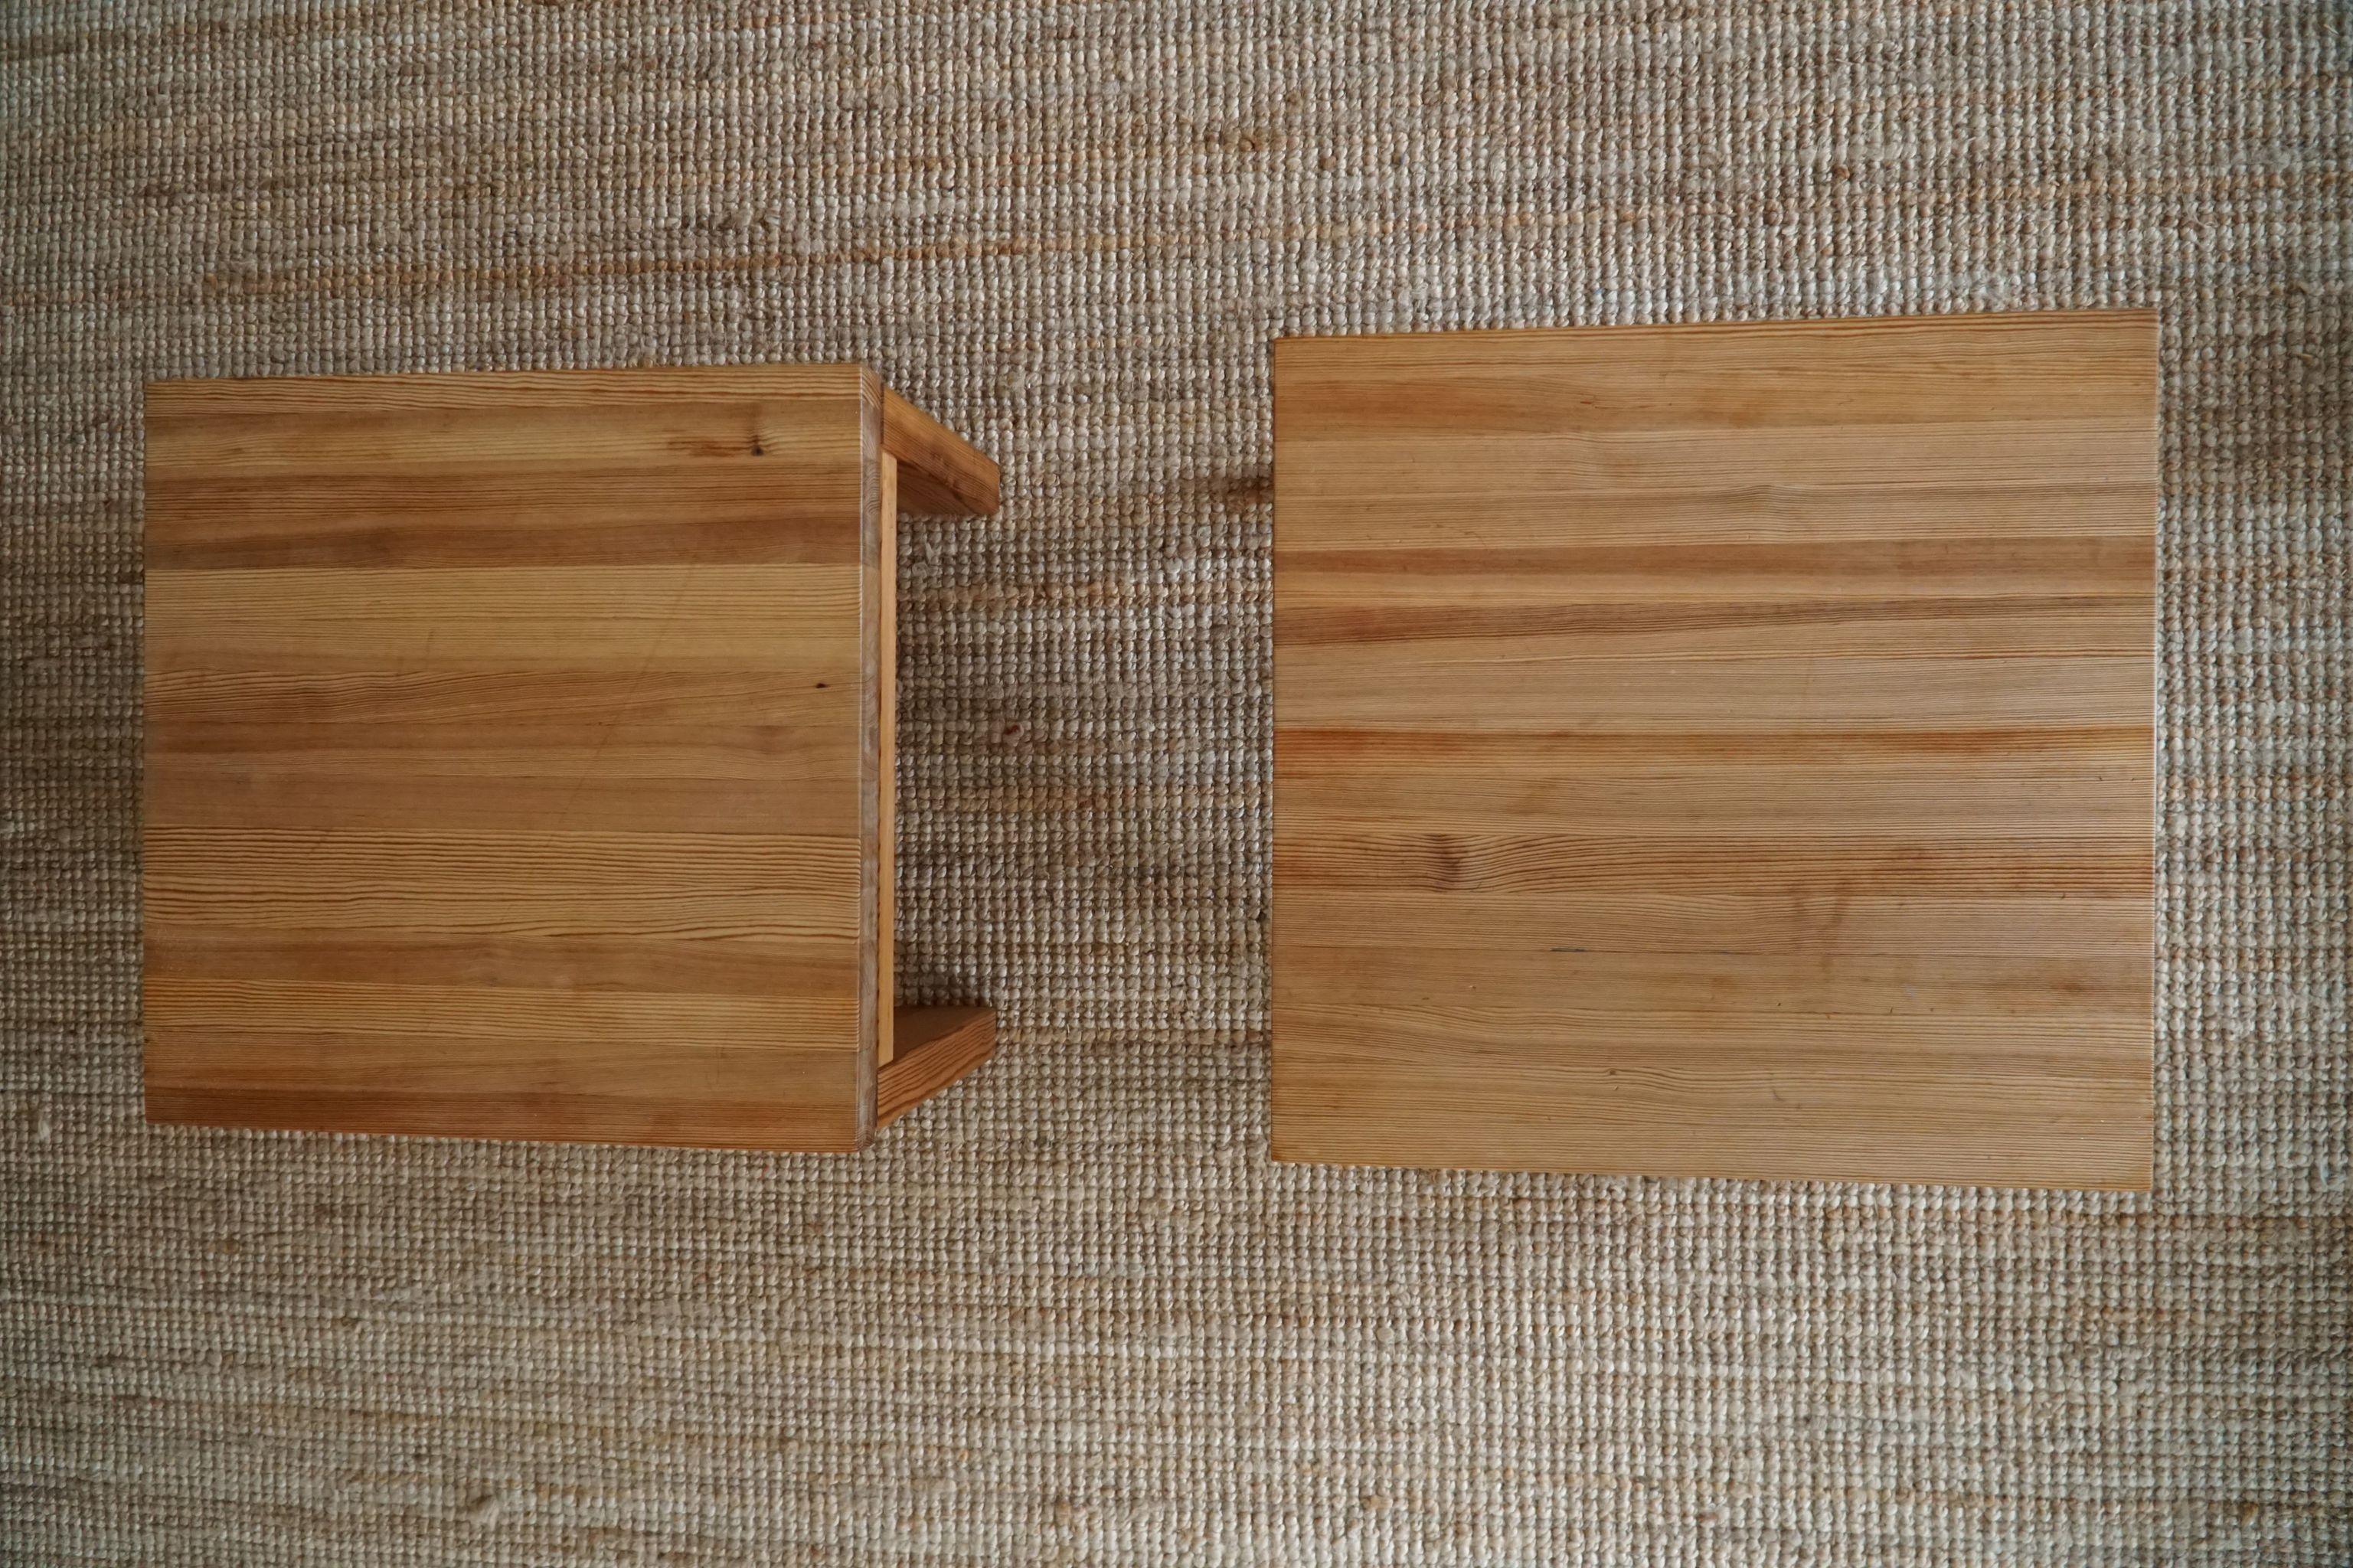 Pair of Danish Modern Brutalist Side Tables in Solid Pine, Made by Nytibo, 1970s 3